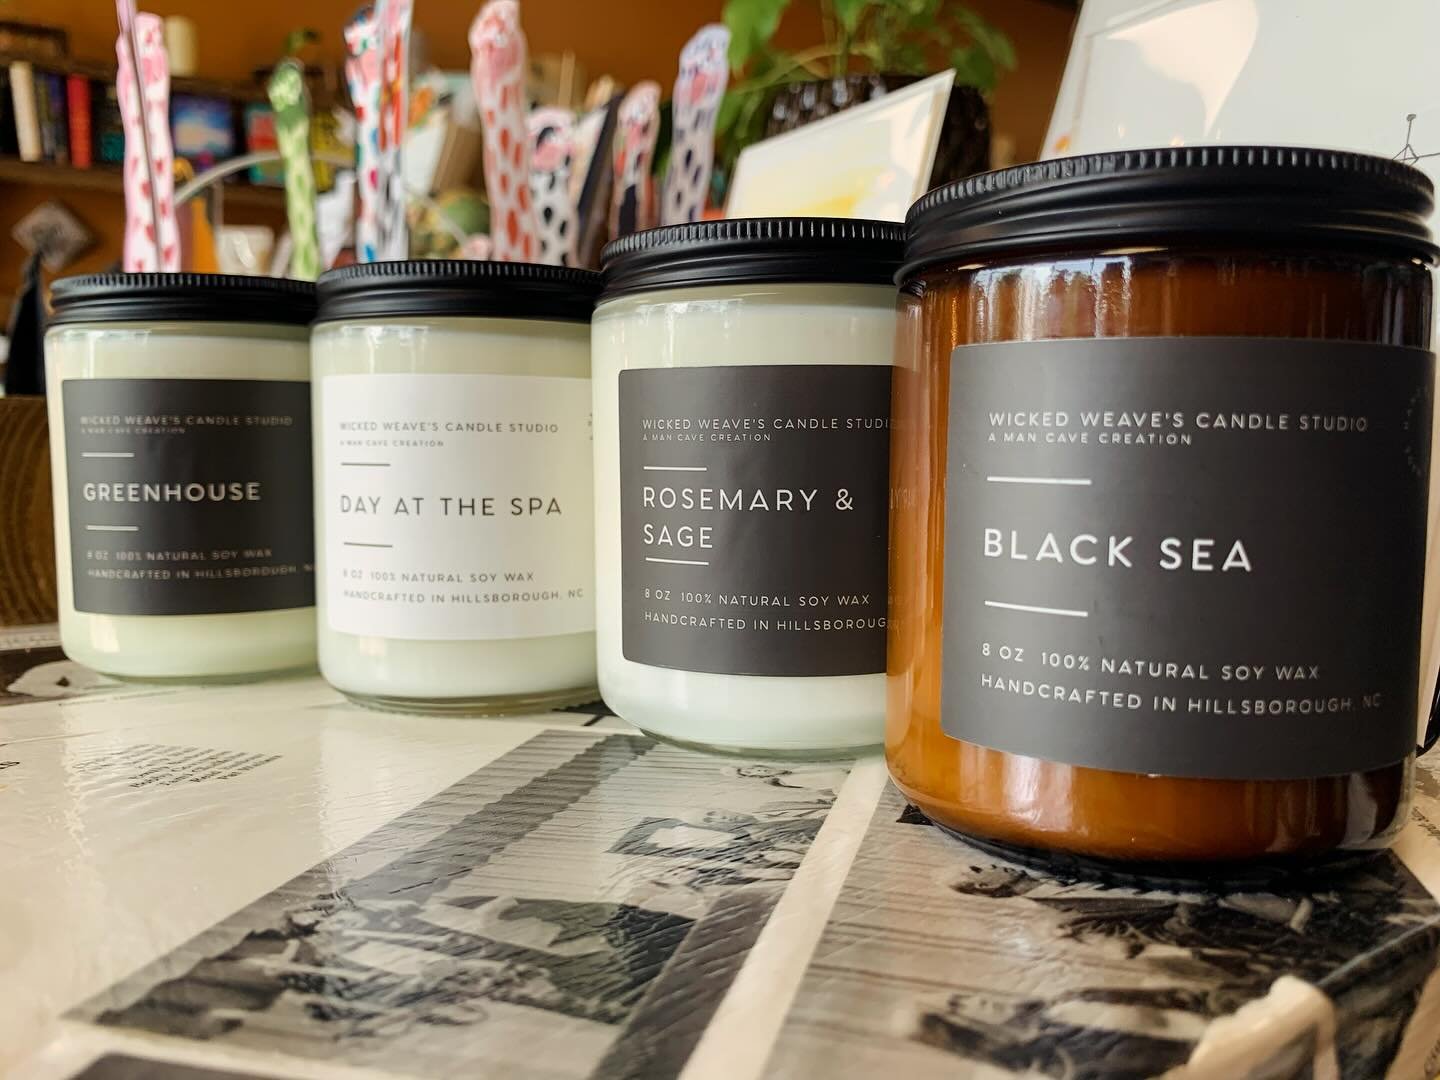 Warm welcome to Hillsborough&rsquo;s @wickedweavecandles2021 to our Wanderlust lineup! The variety of scents means something for everyone &mdash; Tomato Leaf reminds me of my grandmother&rsquo;s garden - and Monkey Fart, well that&rsquo;s one you jus